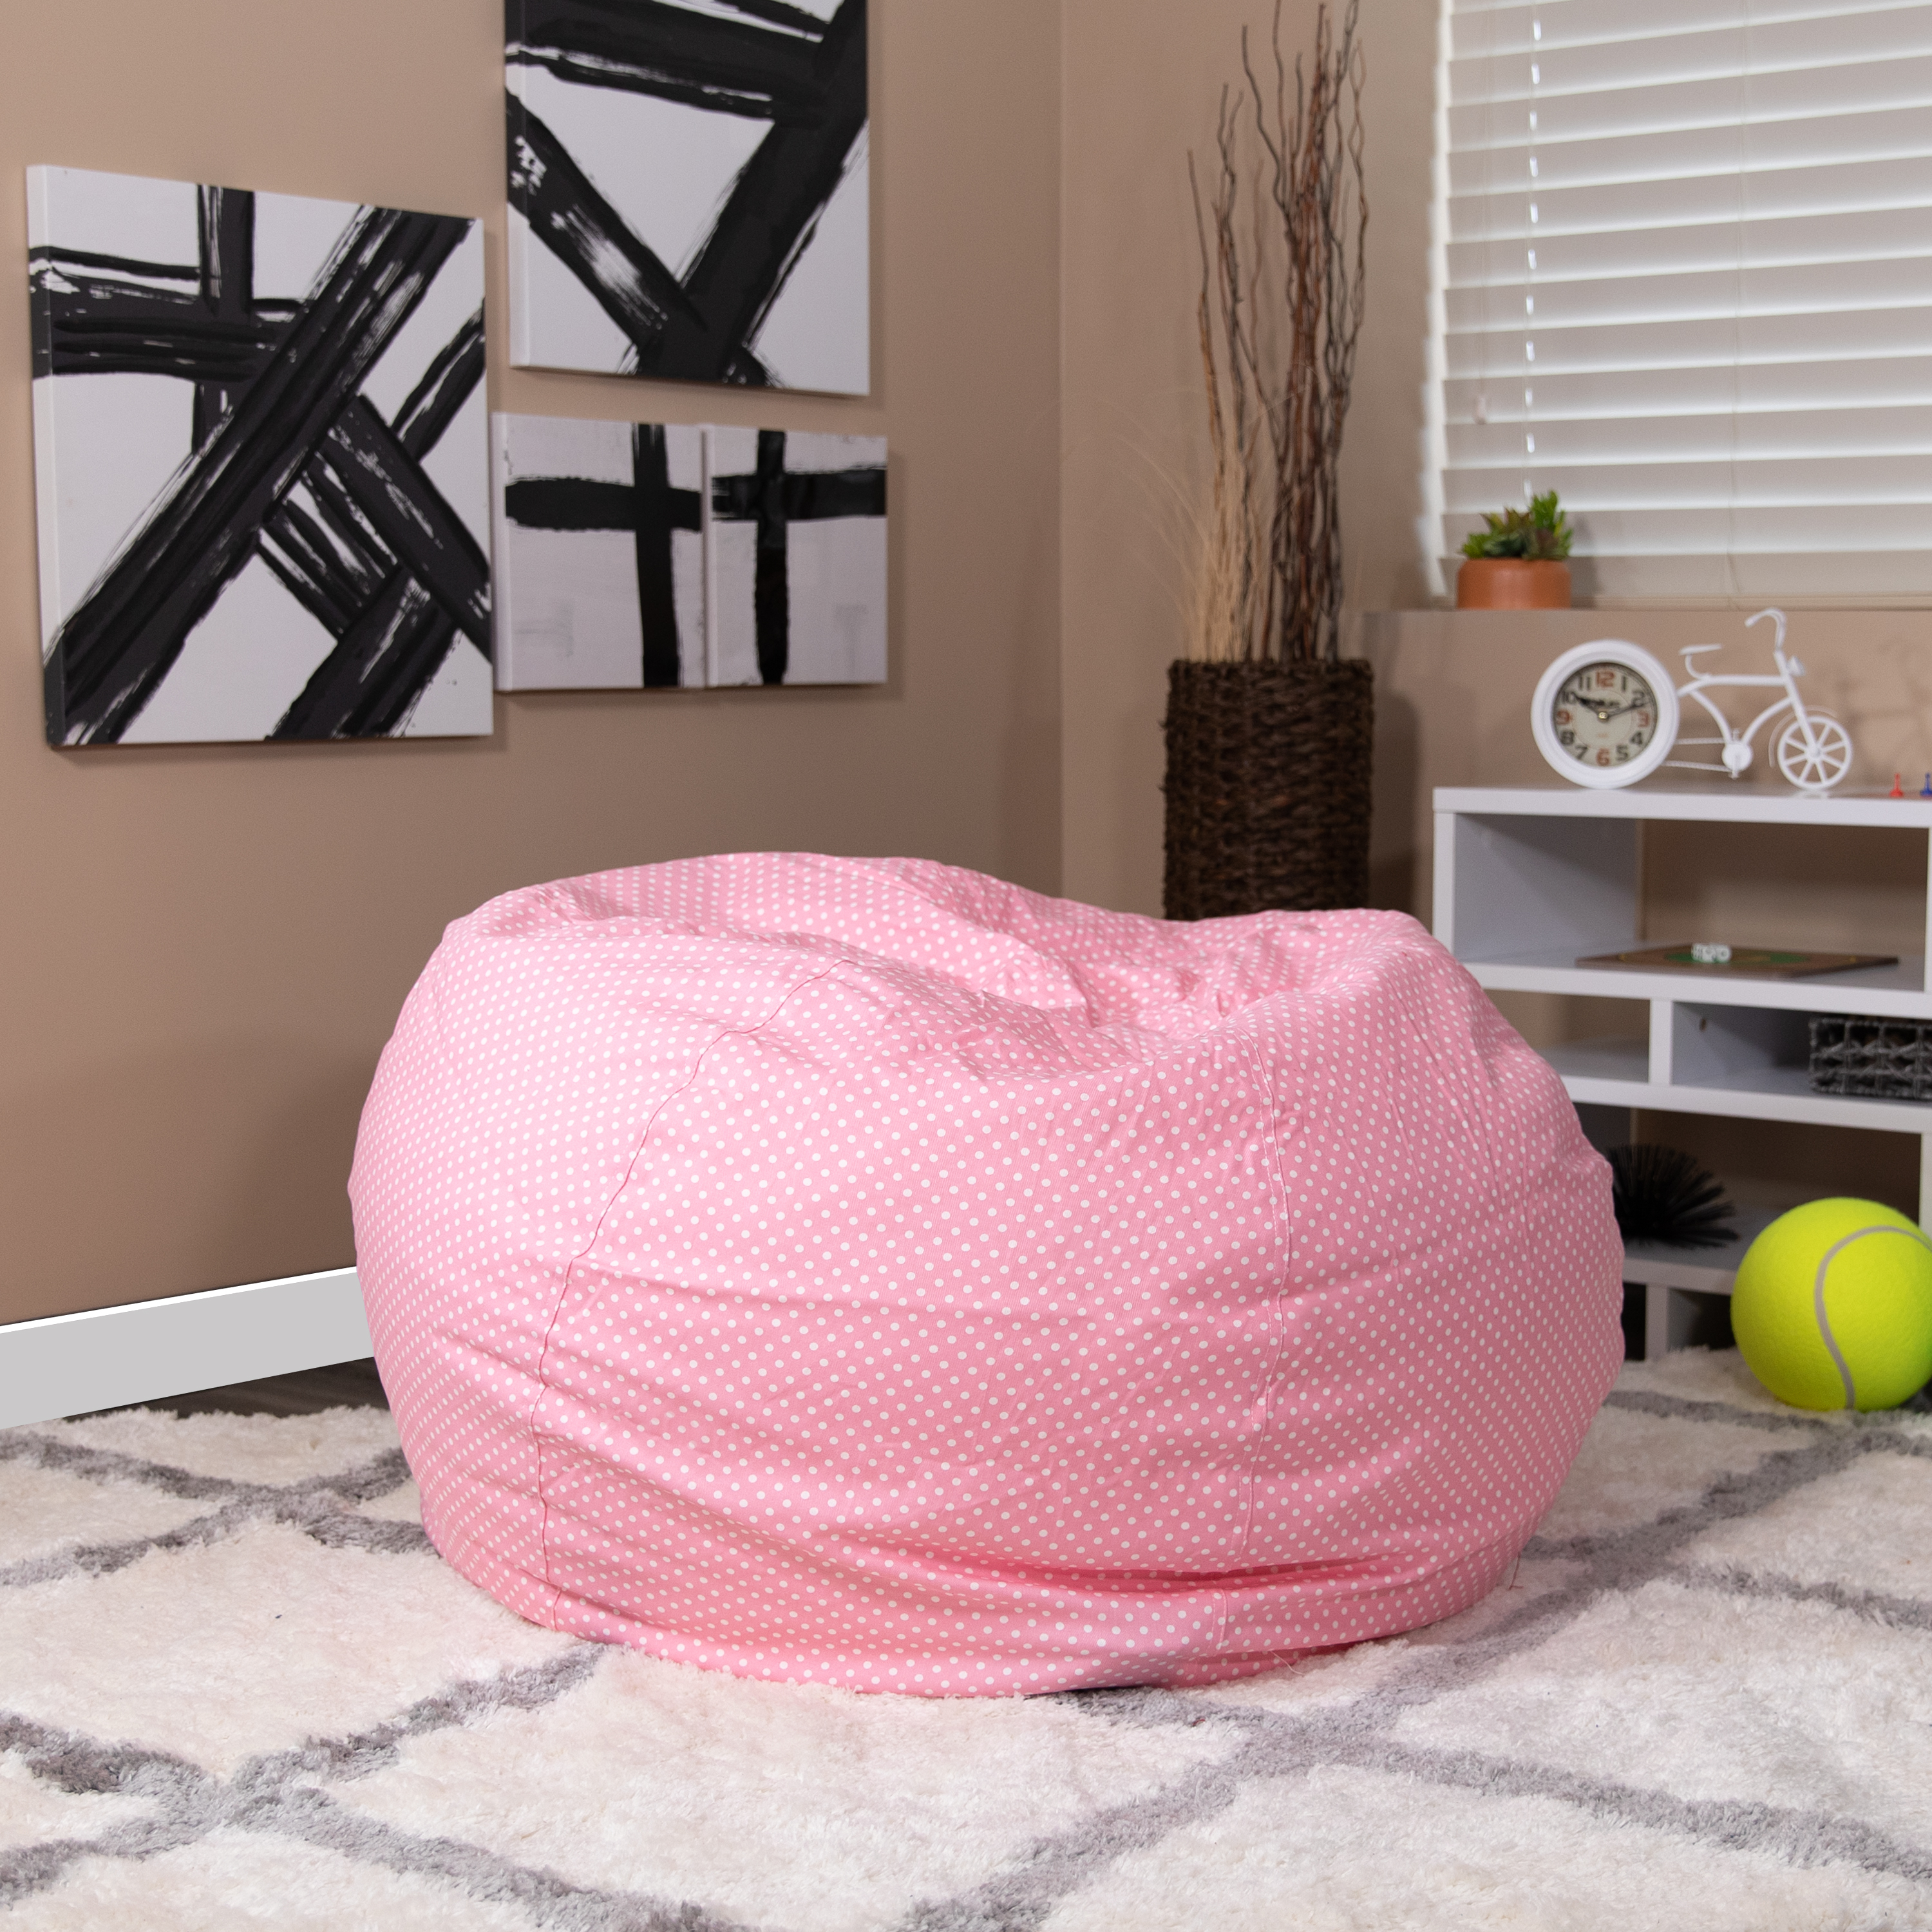 Flash Furniture Oversized Light Pink Dot Refillable Bean Bag Chair for All Ages - image 1 of 9